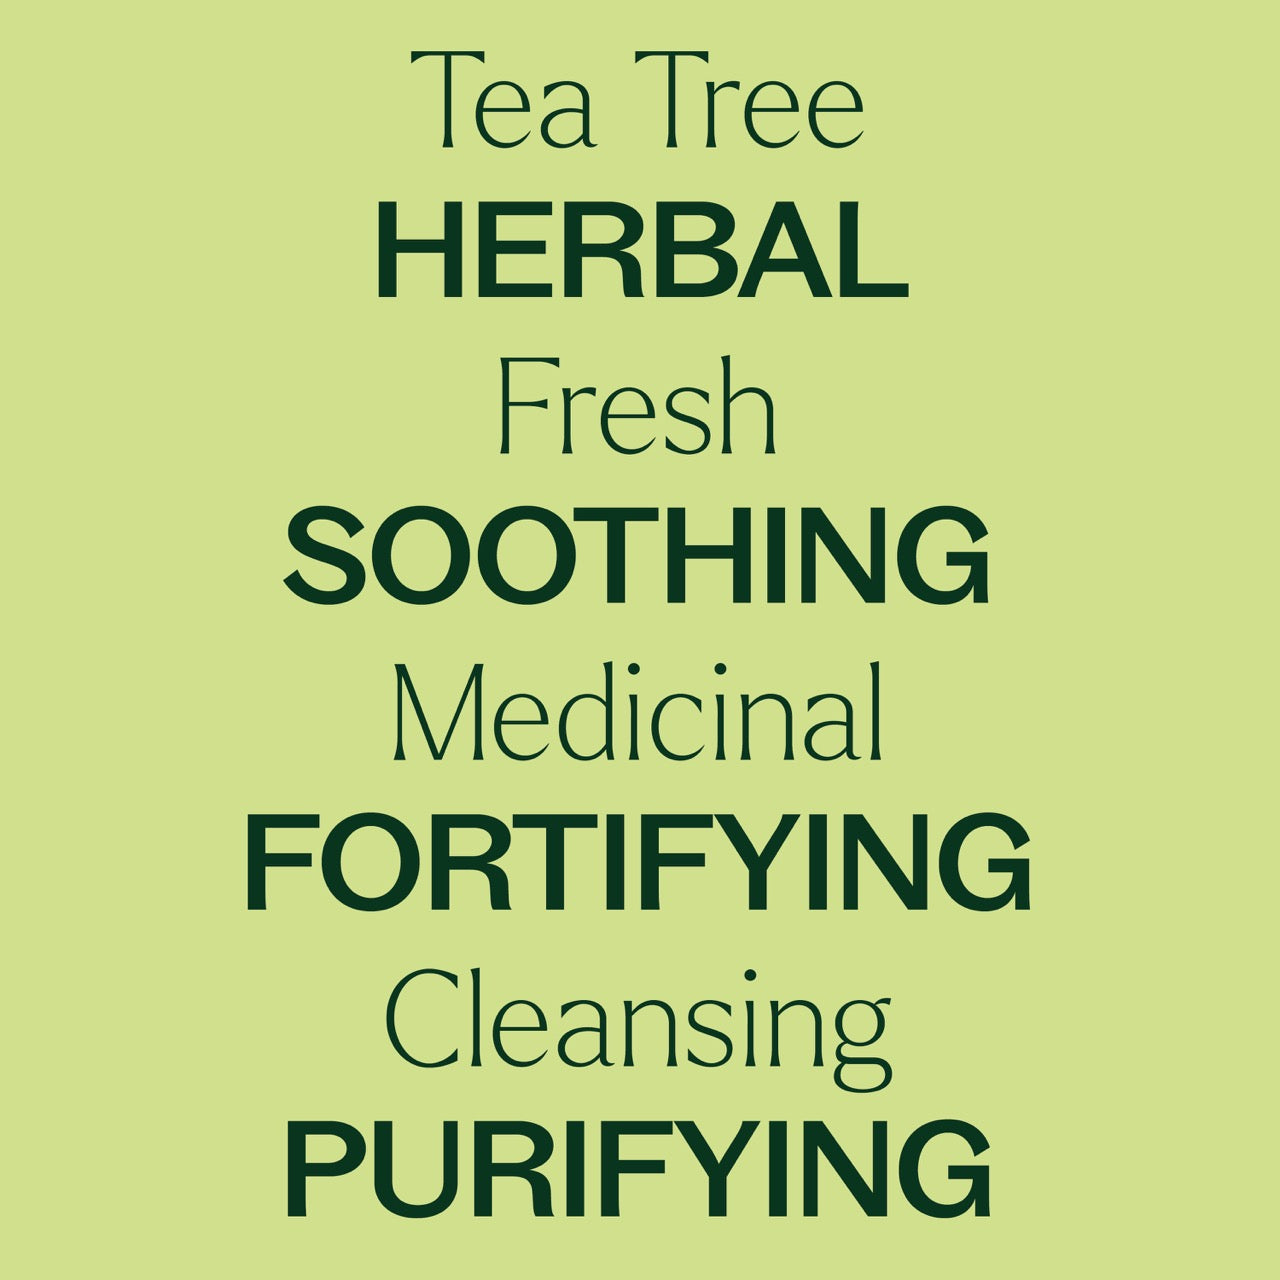 Tea Tree Essential Oil key features: herbal, fresh, soothing, medicinal, fortifying, cleansing, purifying